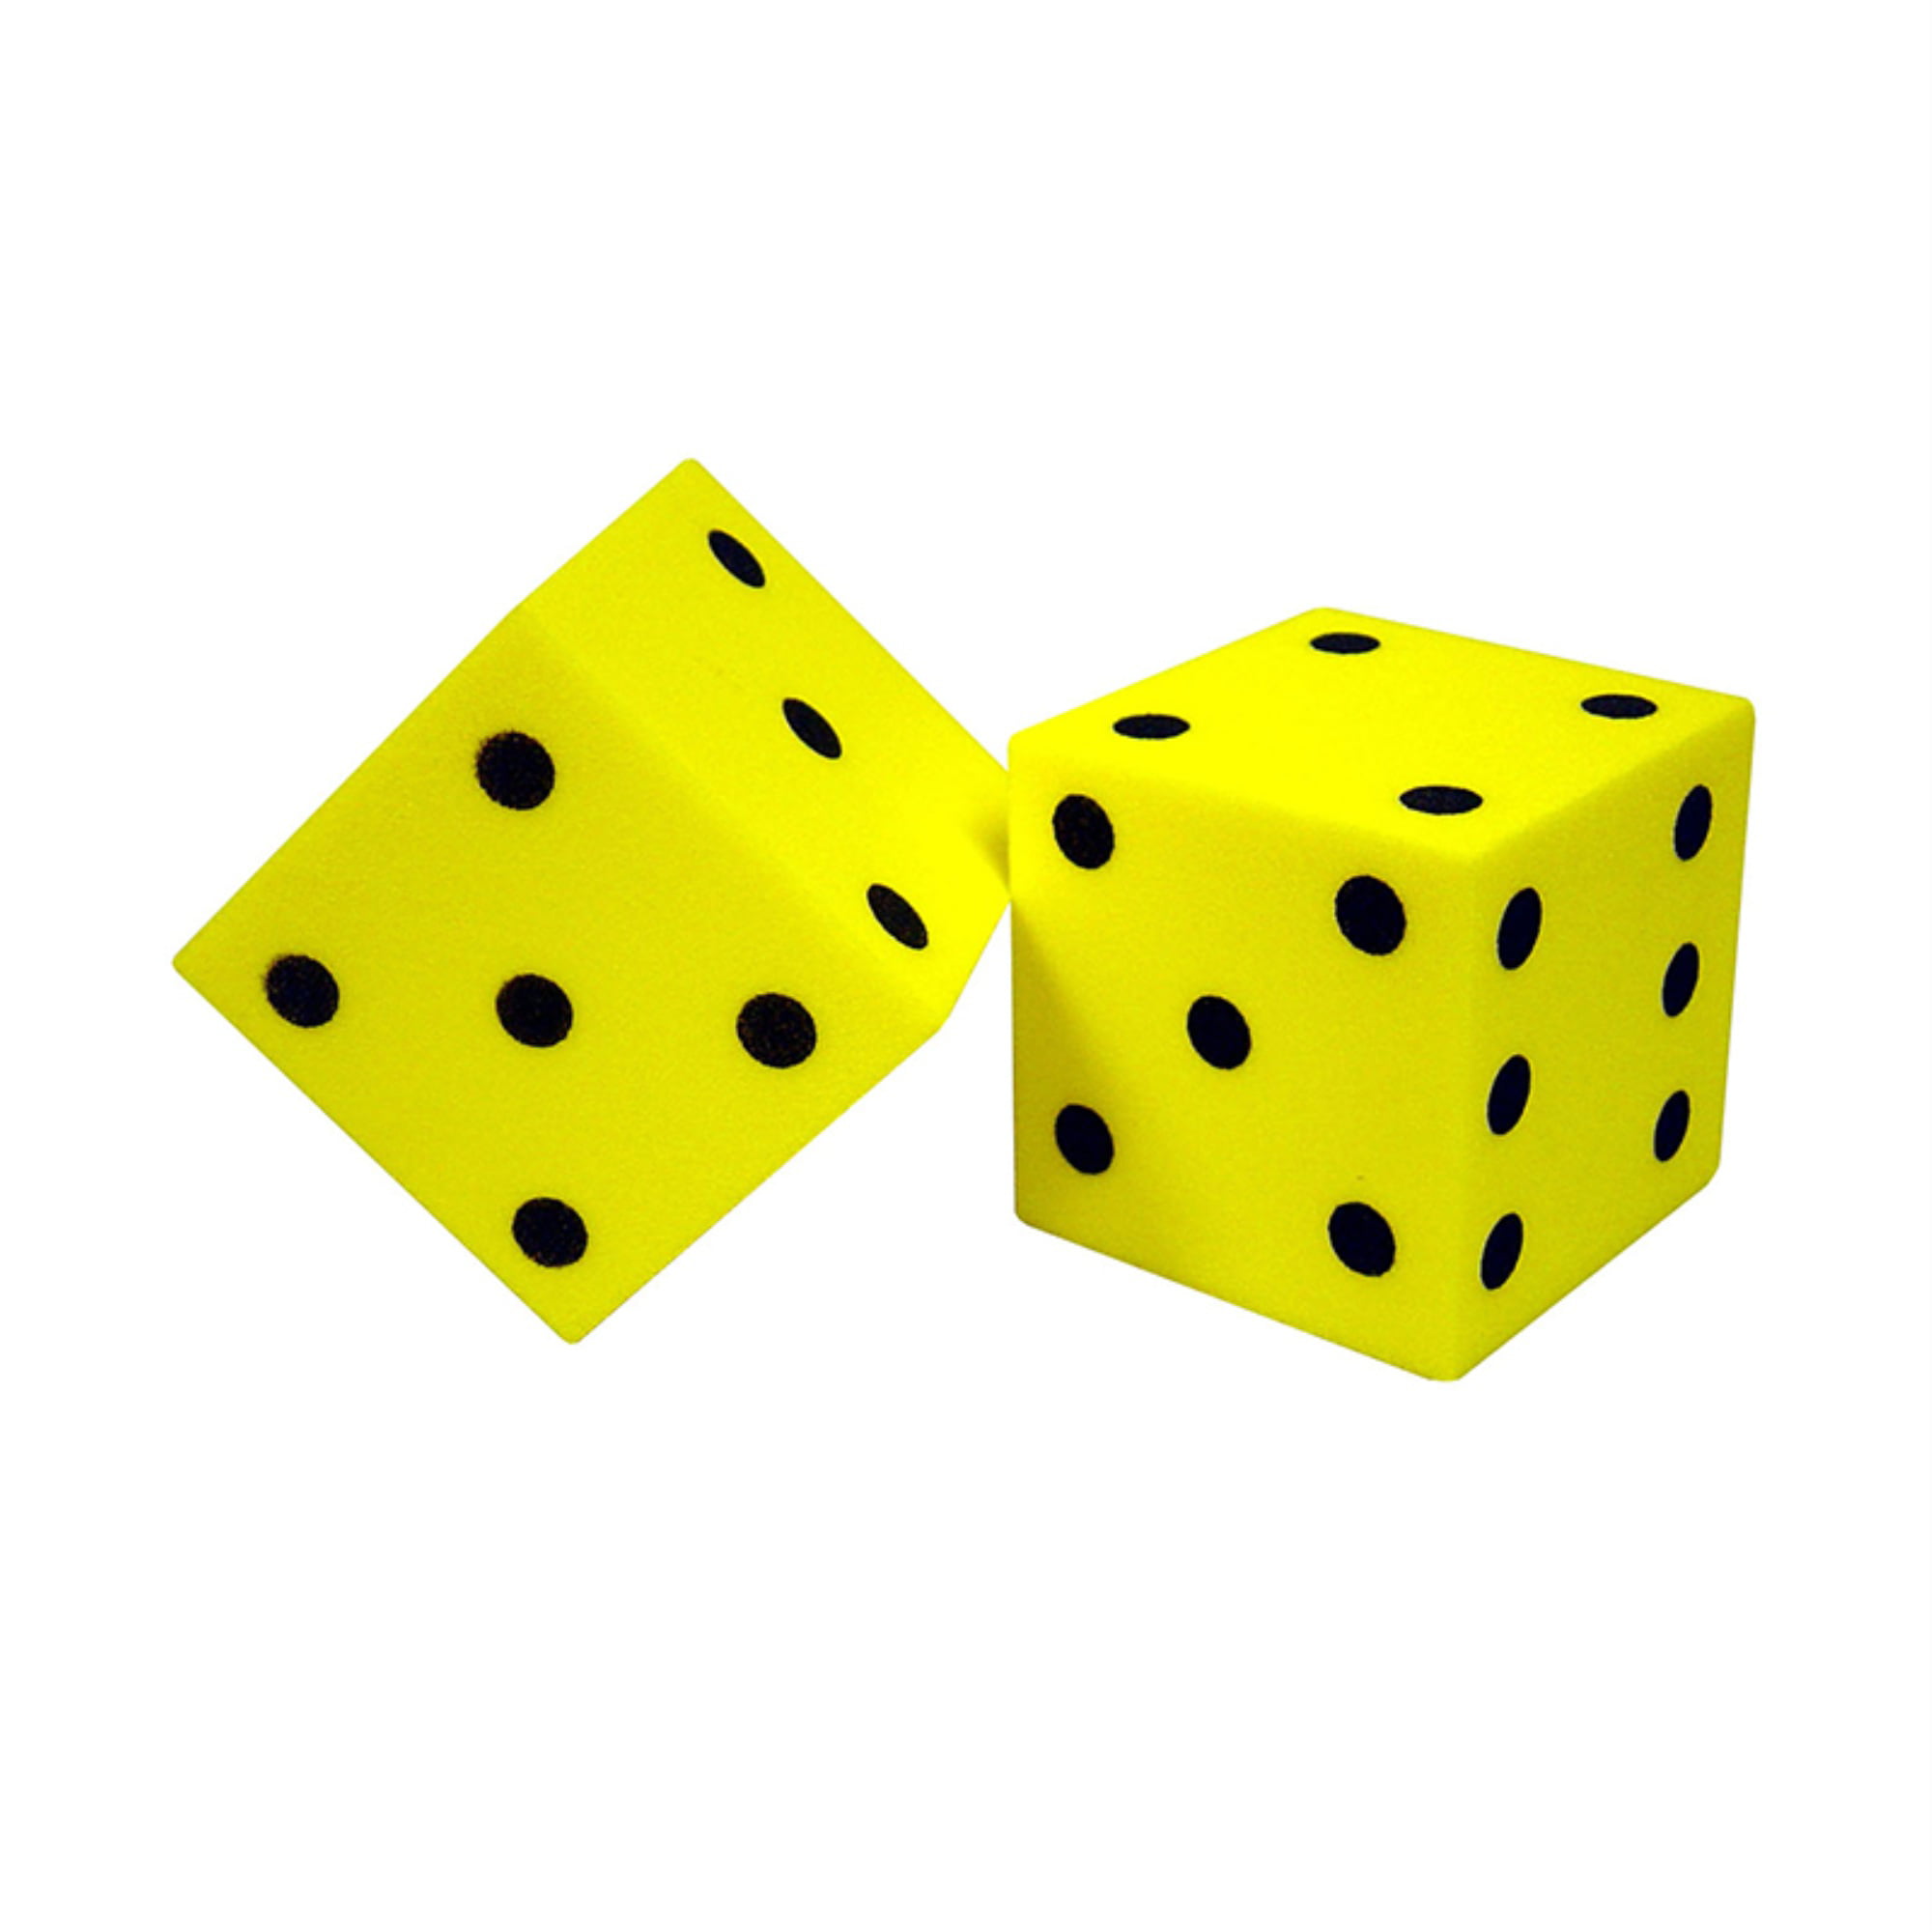 Pack of 2 50mm D6 Round Foam Dice Numbered 1 to 6 Yellow with Black Numbers 